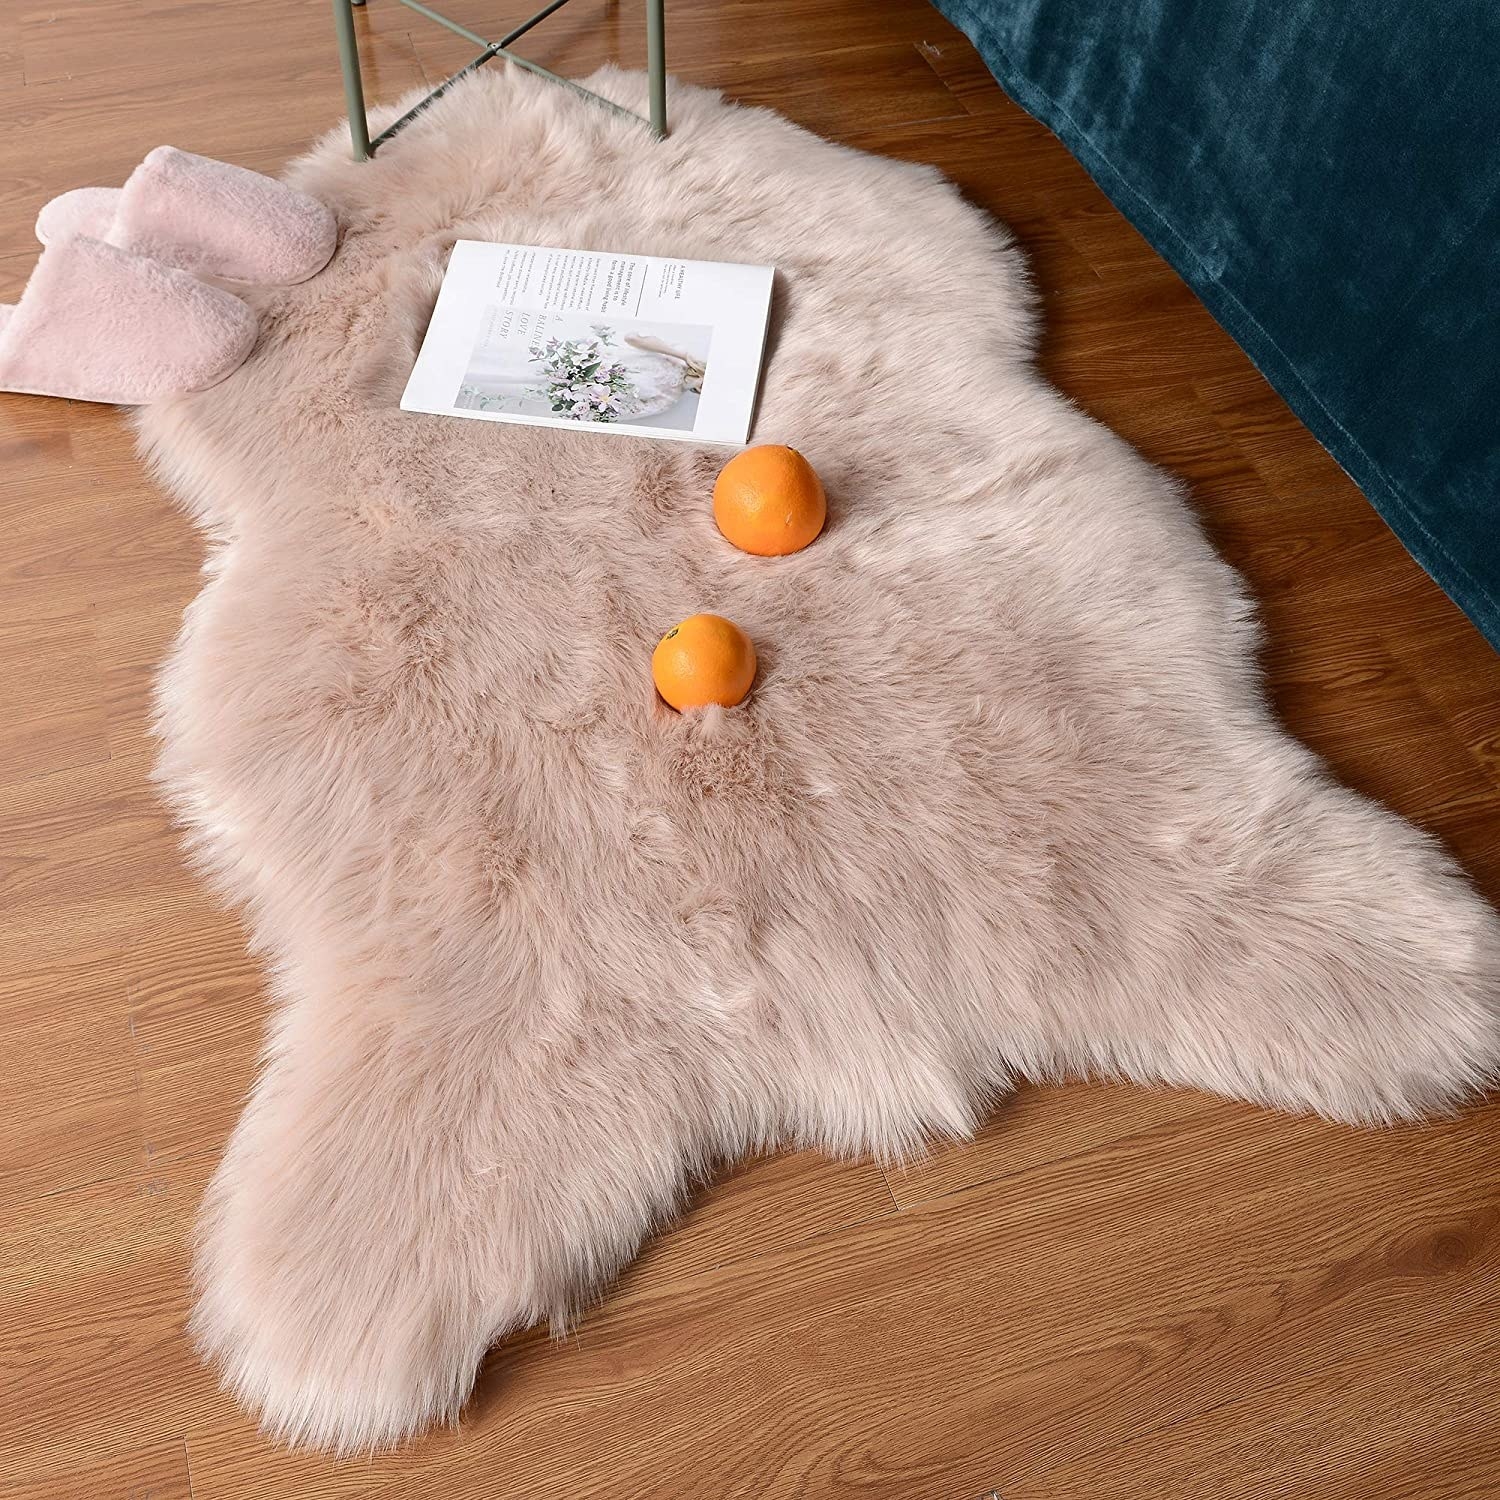 The rug on a wood floor with a magazine, slippers, and oranges on top of it